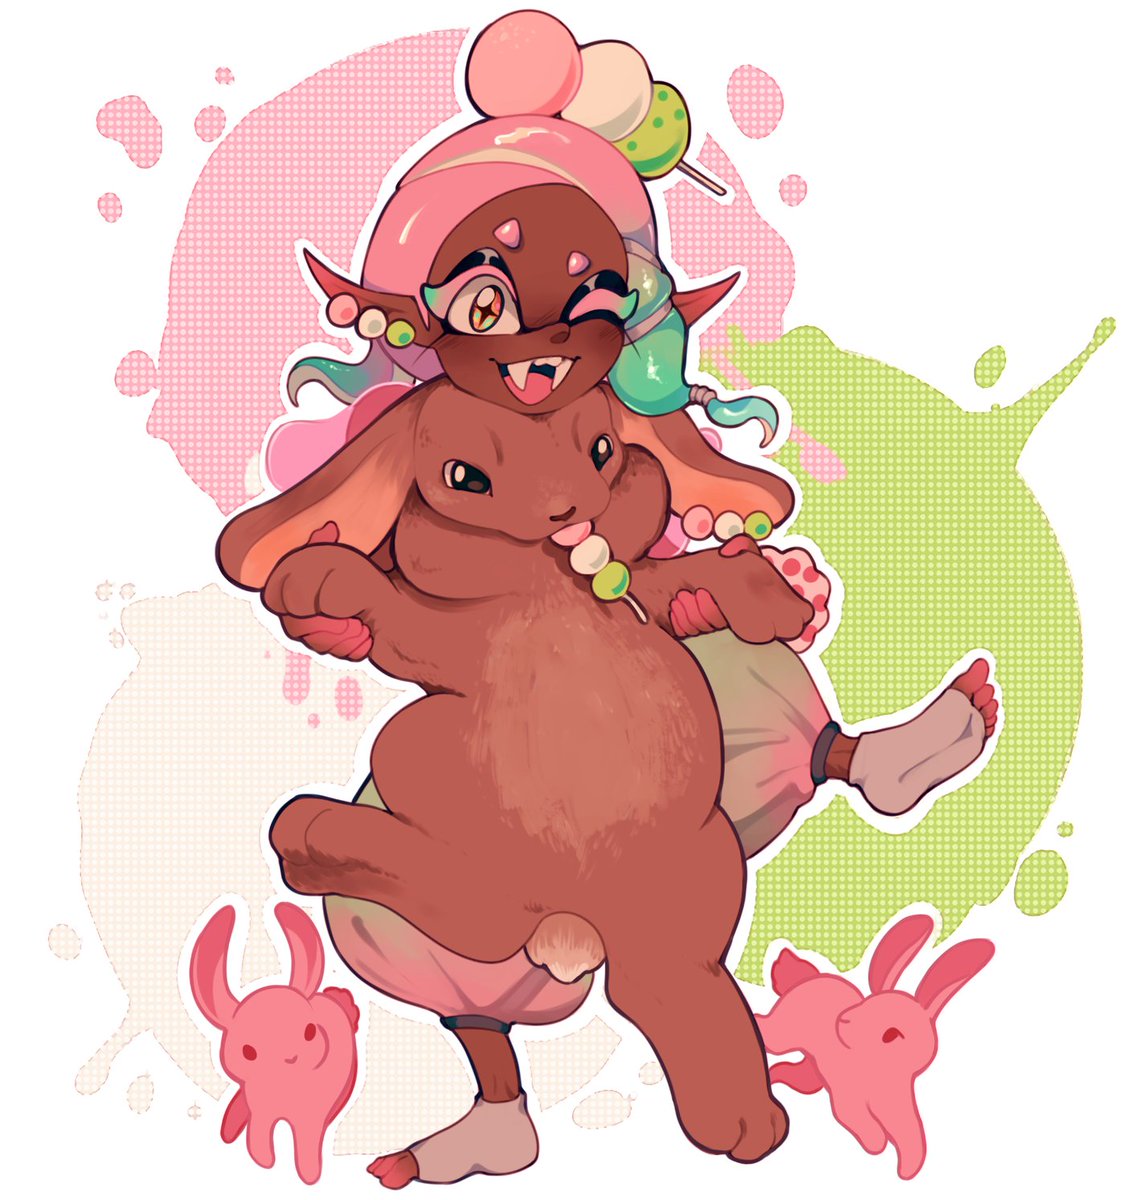 [#splatoon] springfest frye with some bunnies, for a patron!